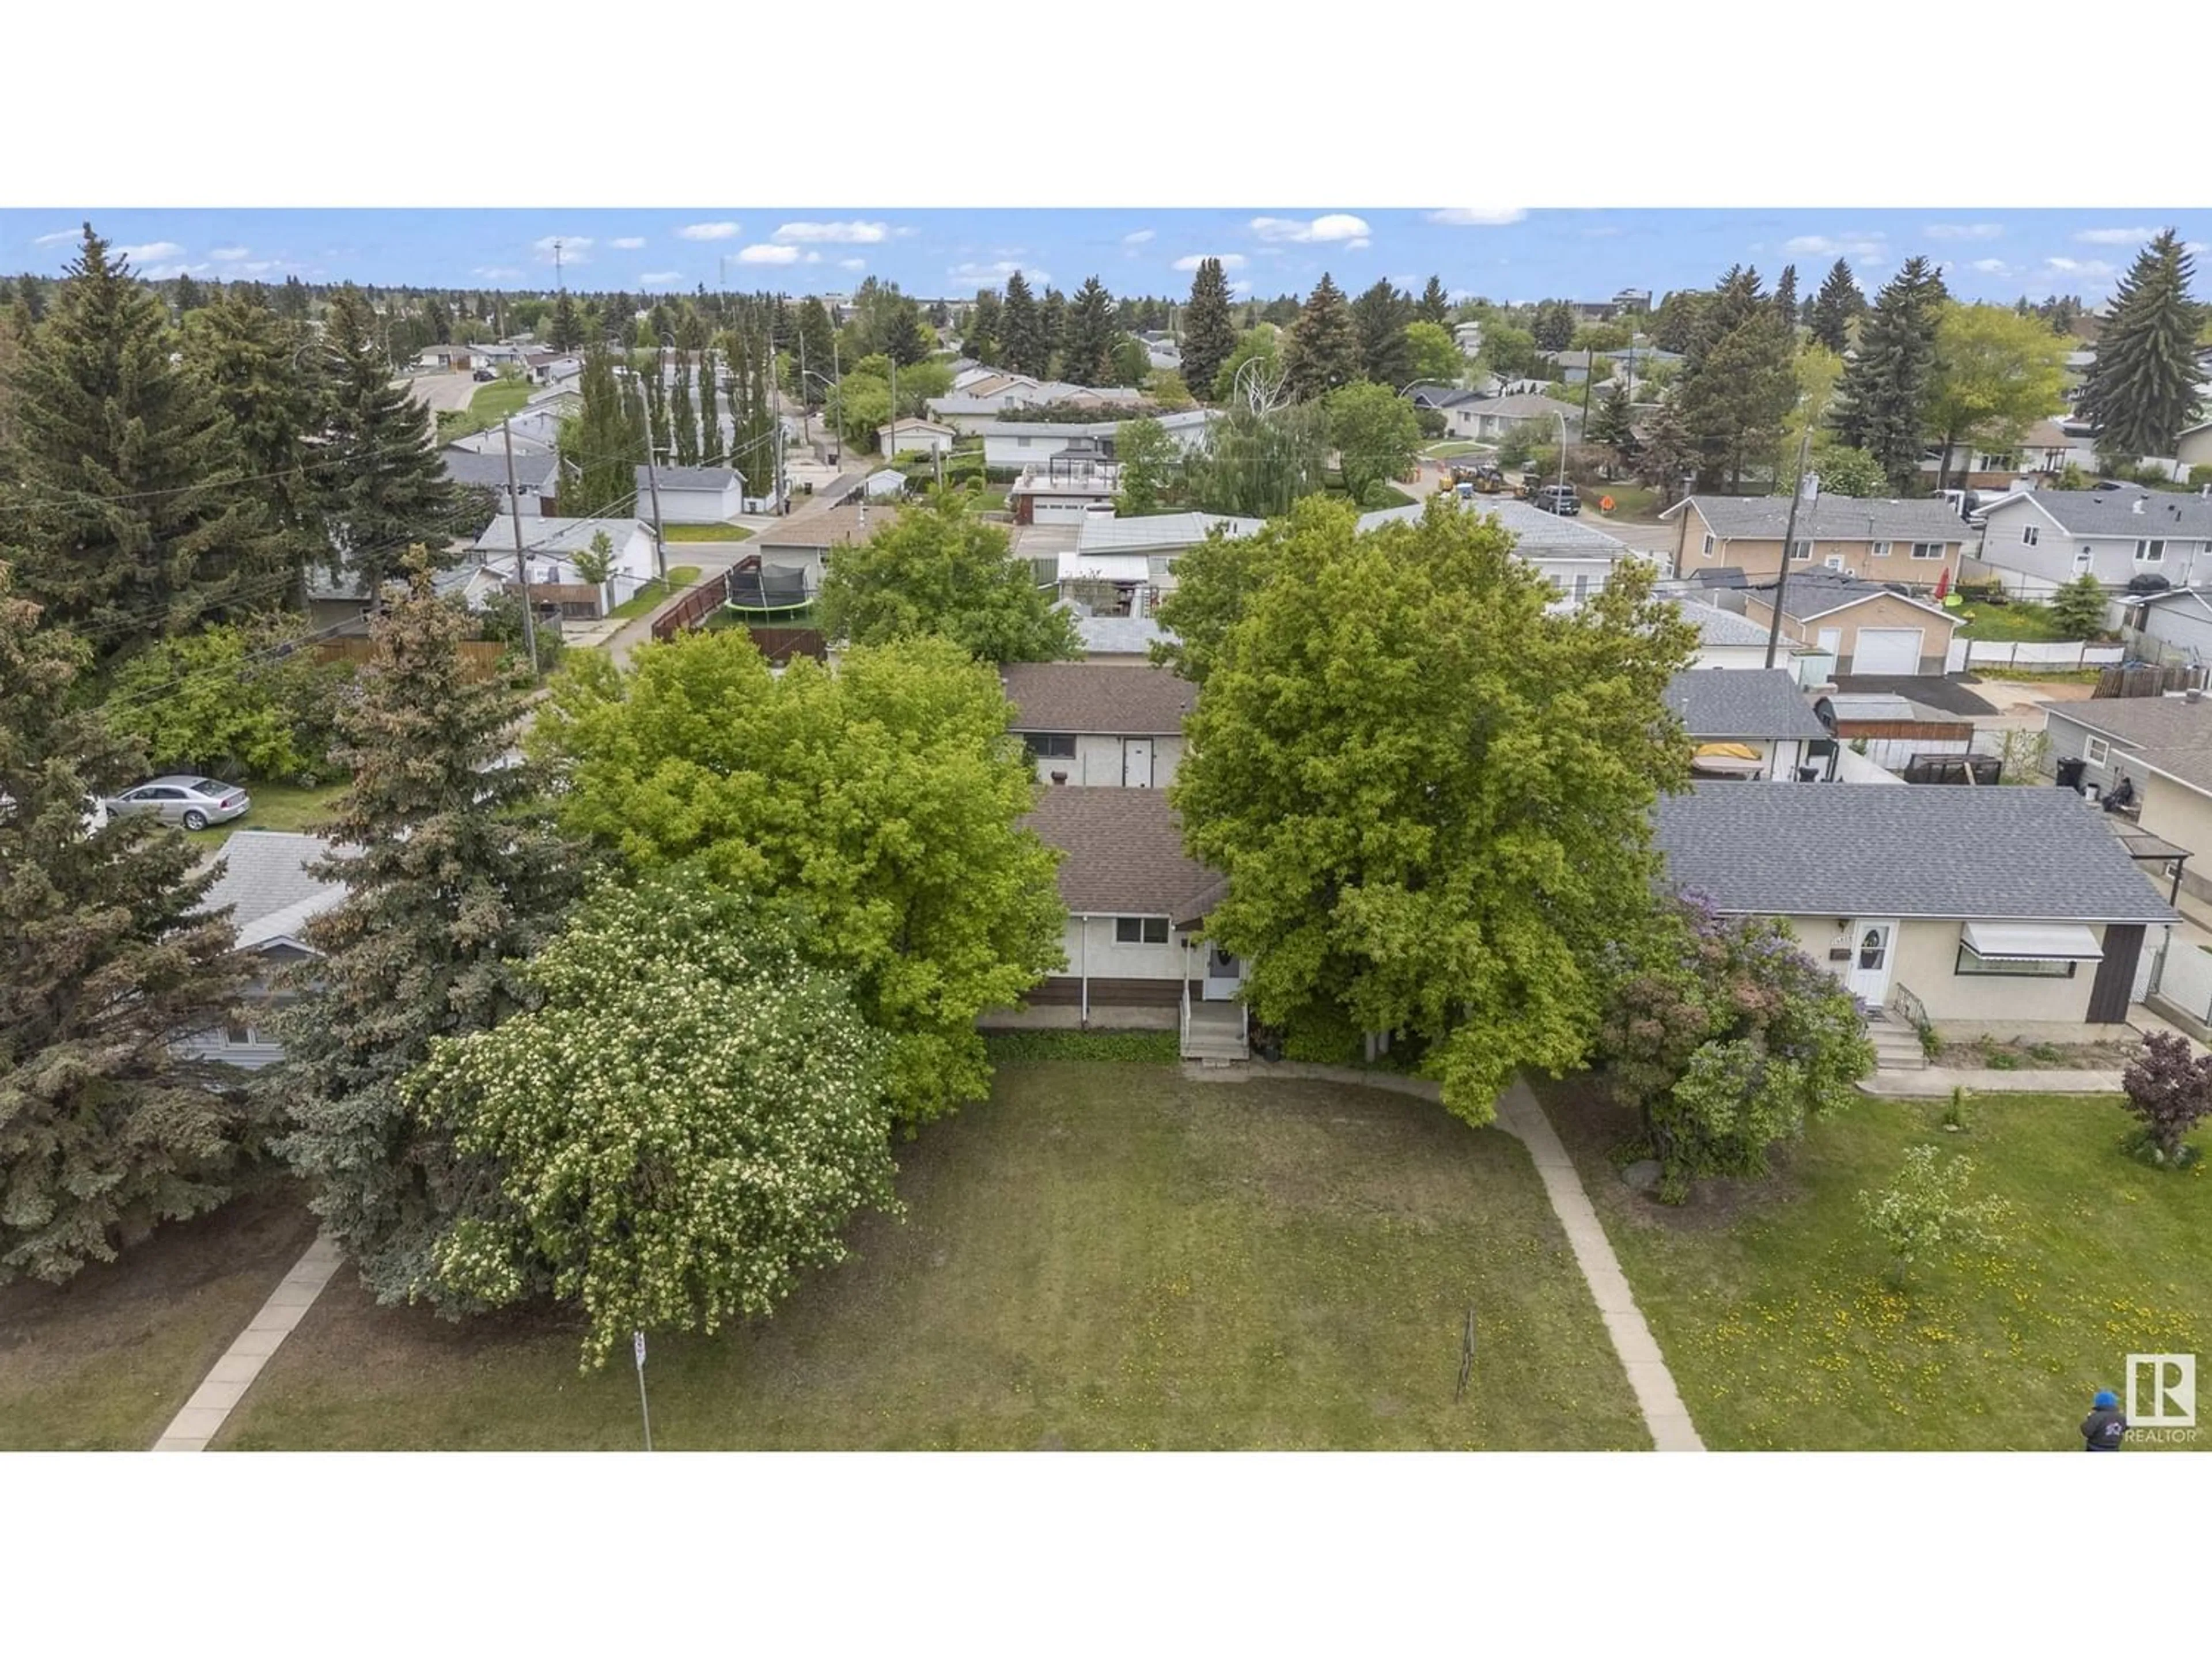 Lakeview for 14016 58 ST NW, Edmonton Alberta T5A1N4